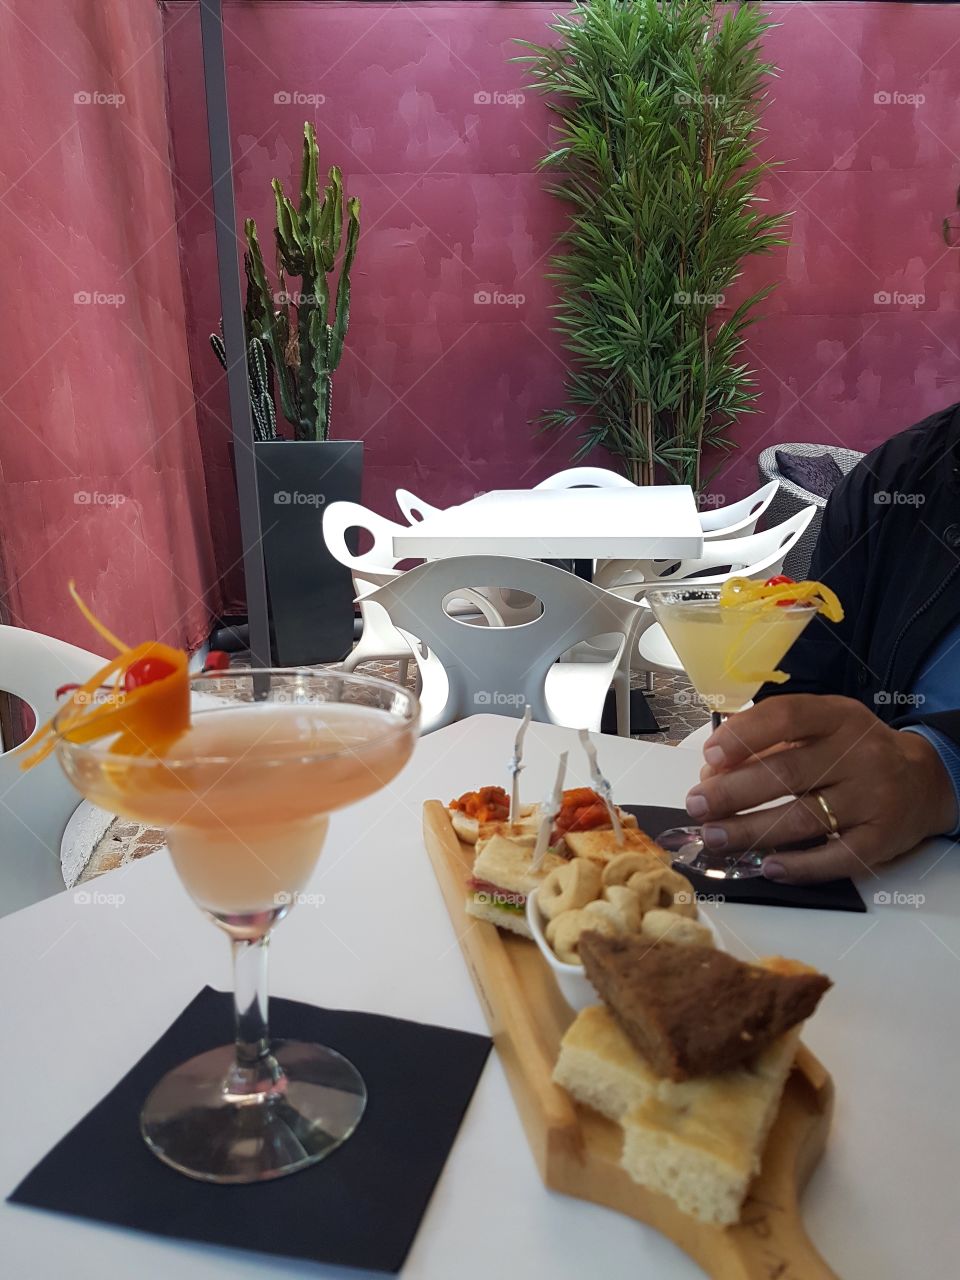 Cocktails and finger food at happy hour